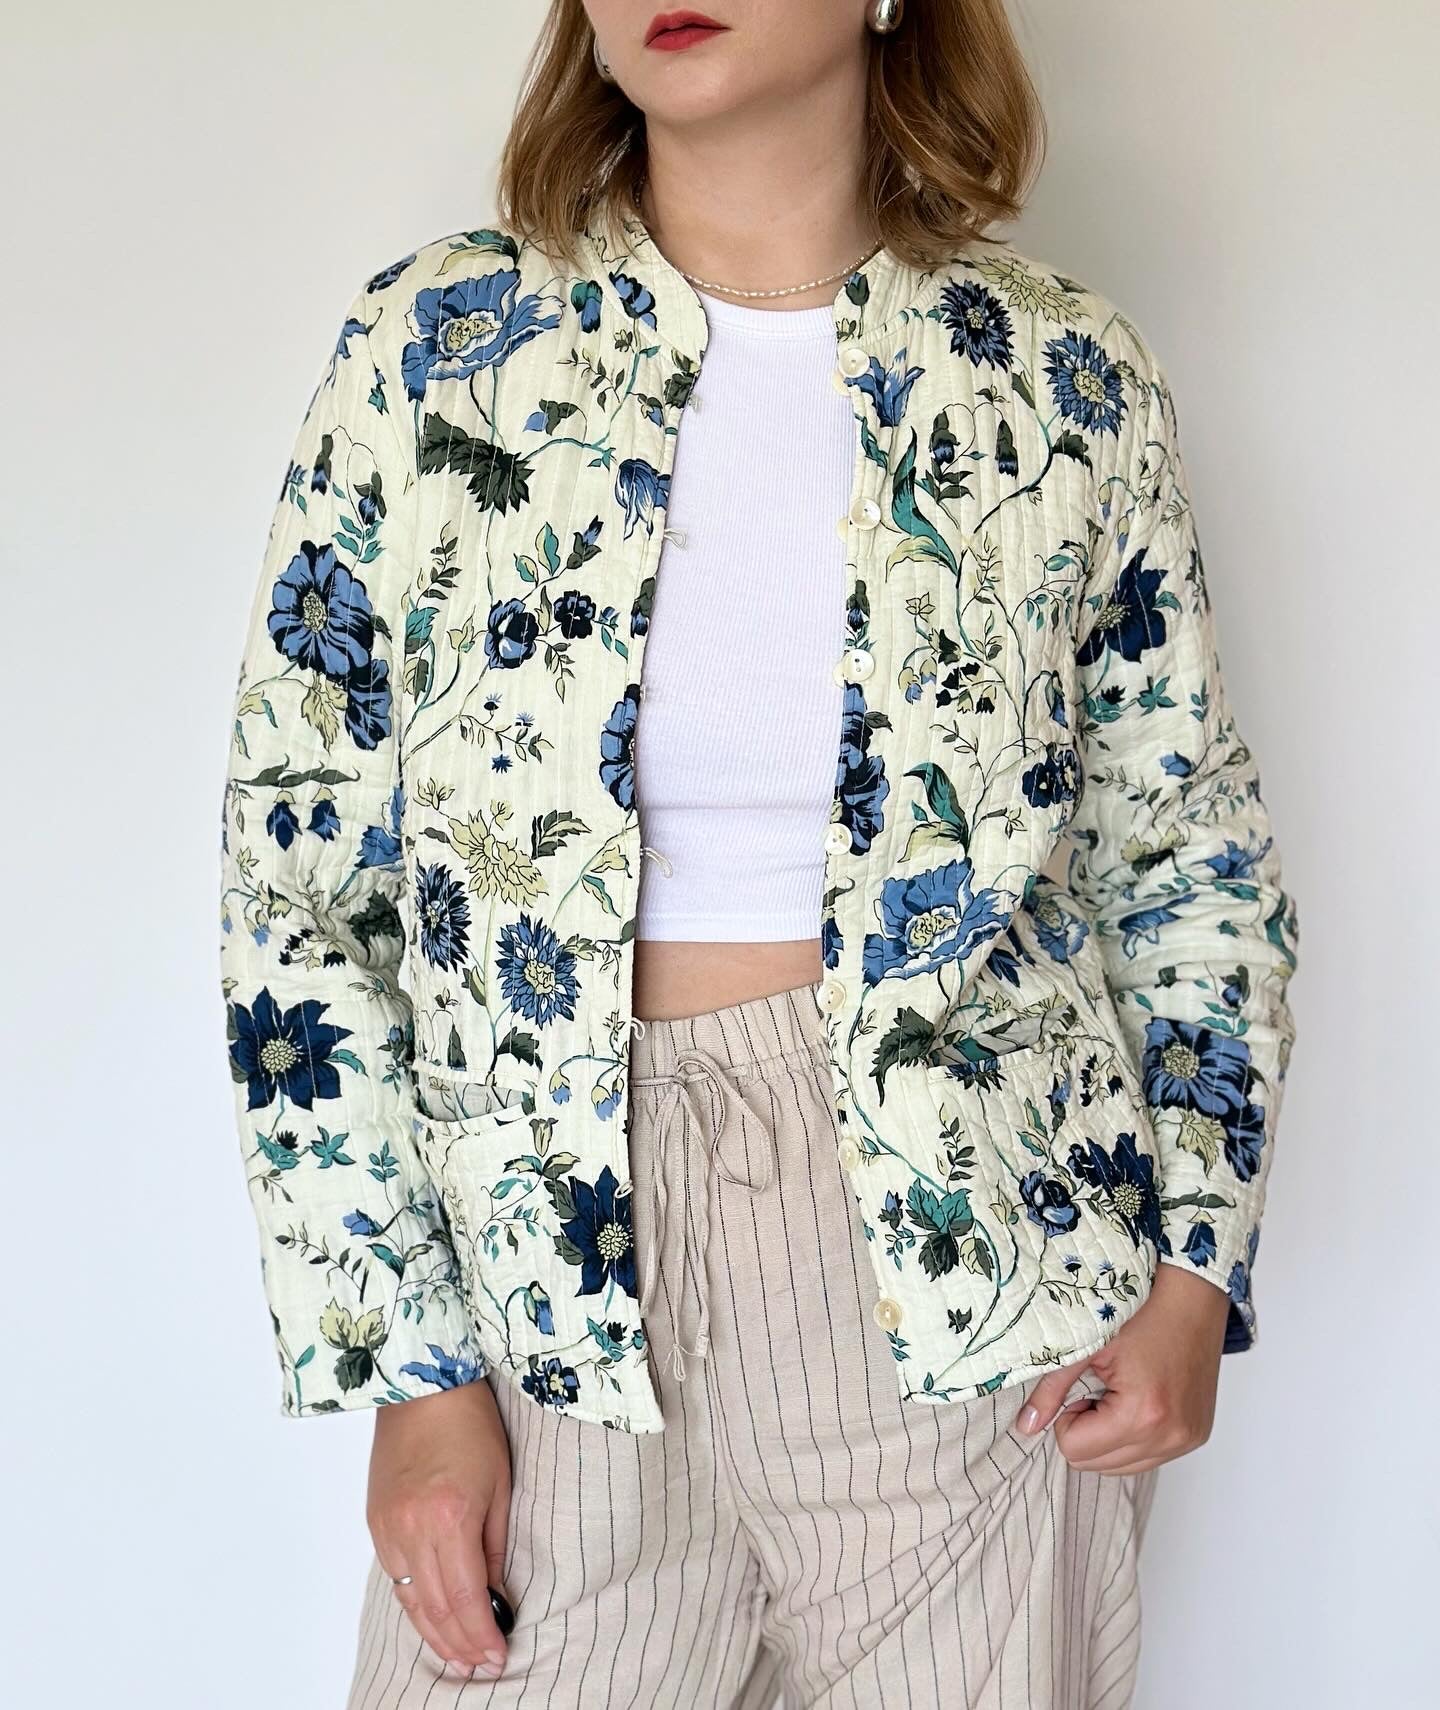 Lovely quilted jacket with floral print